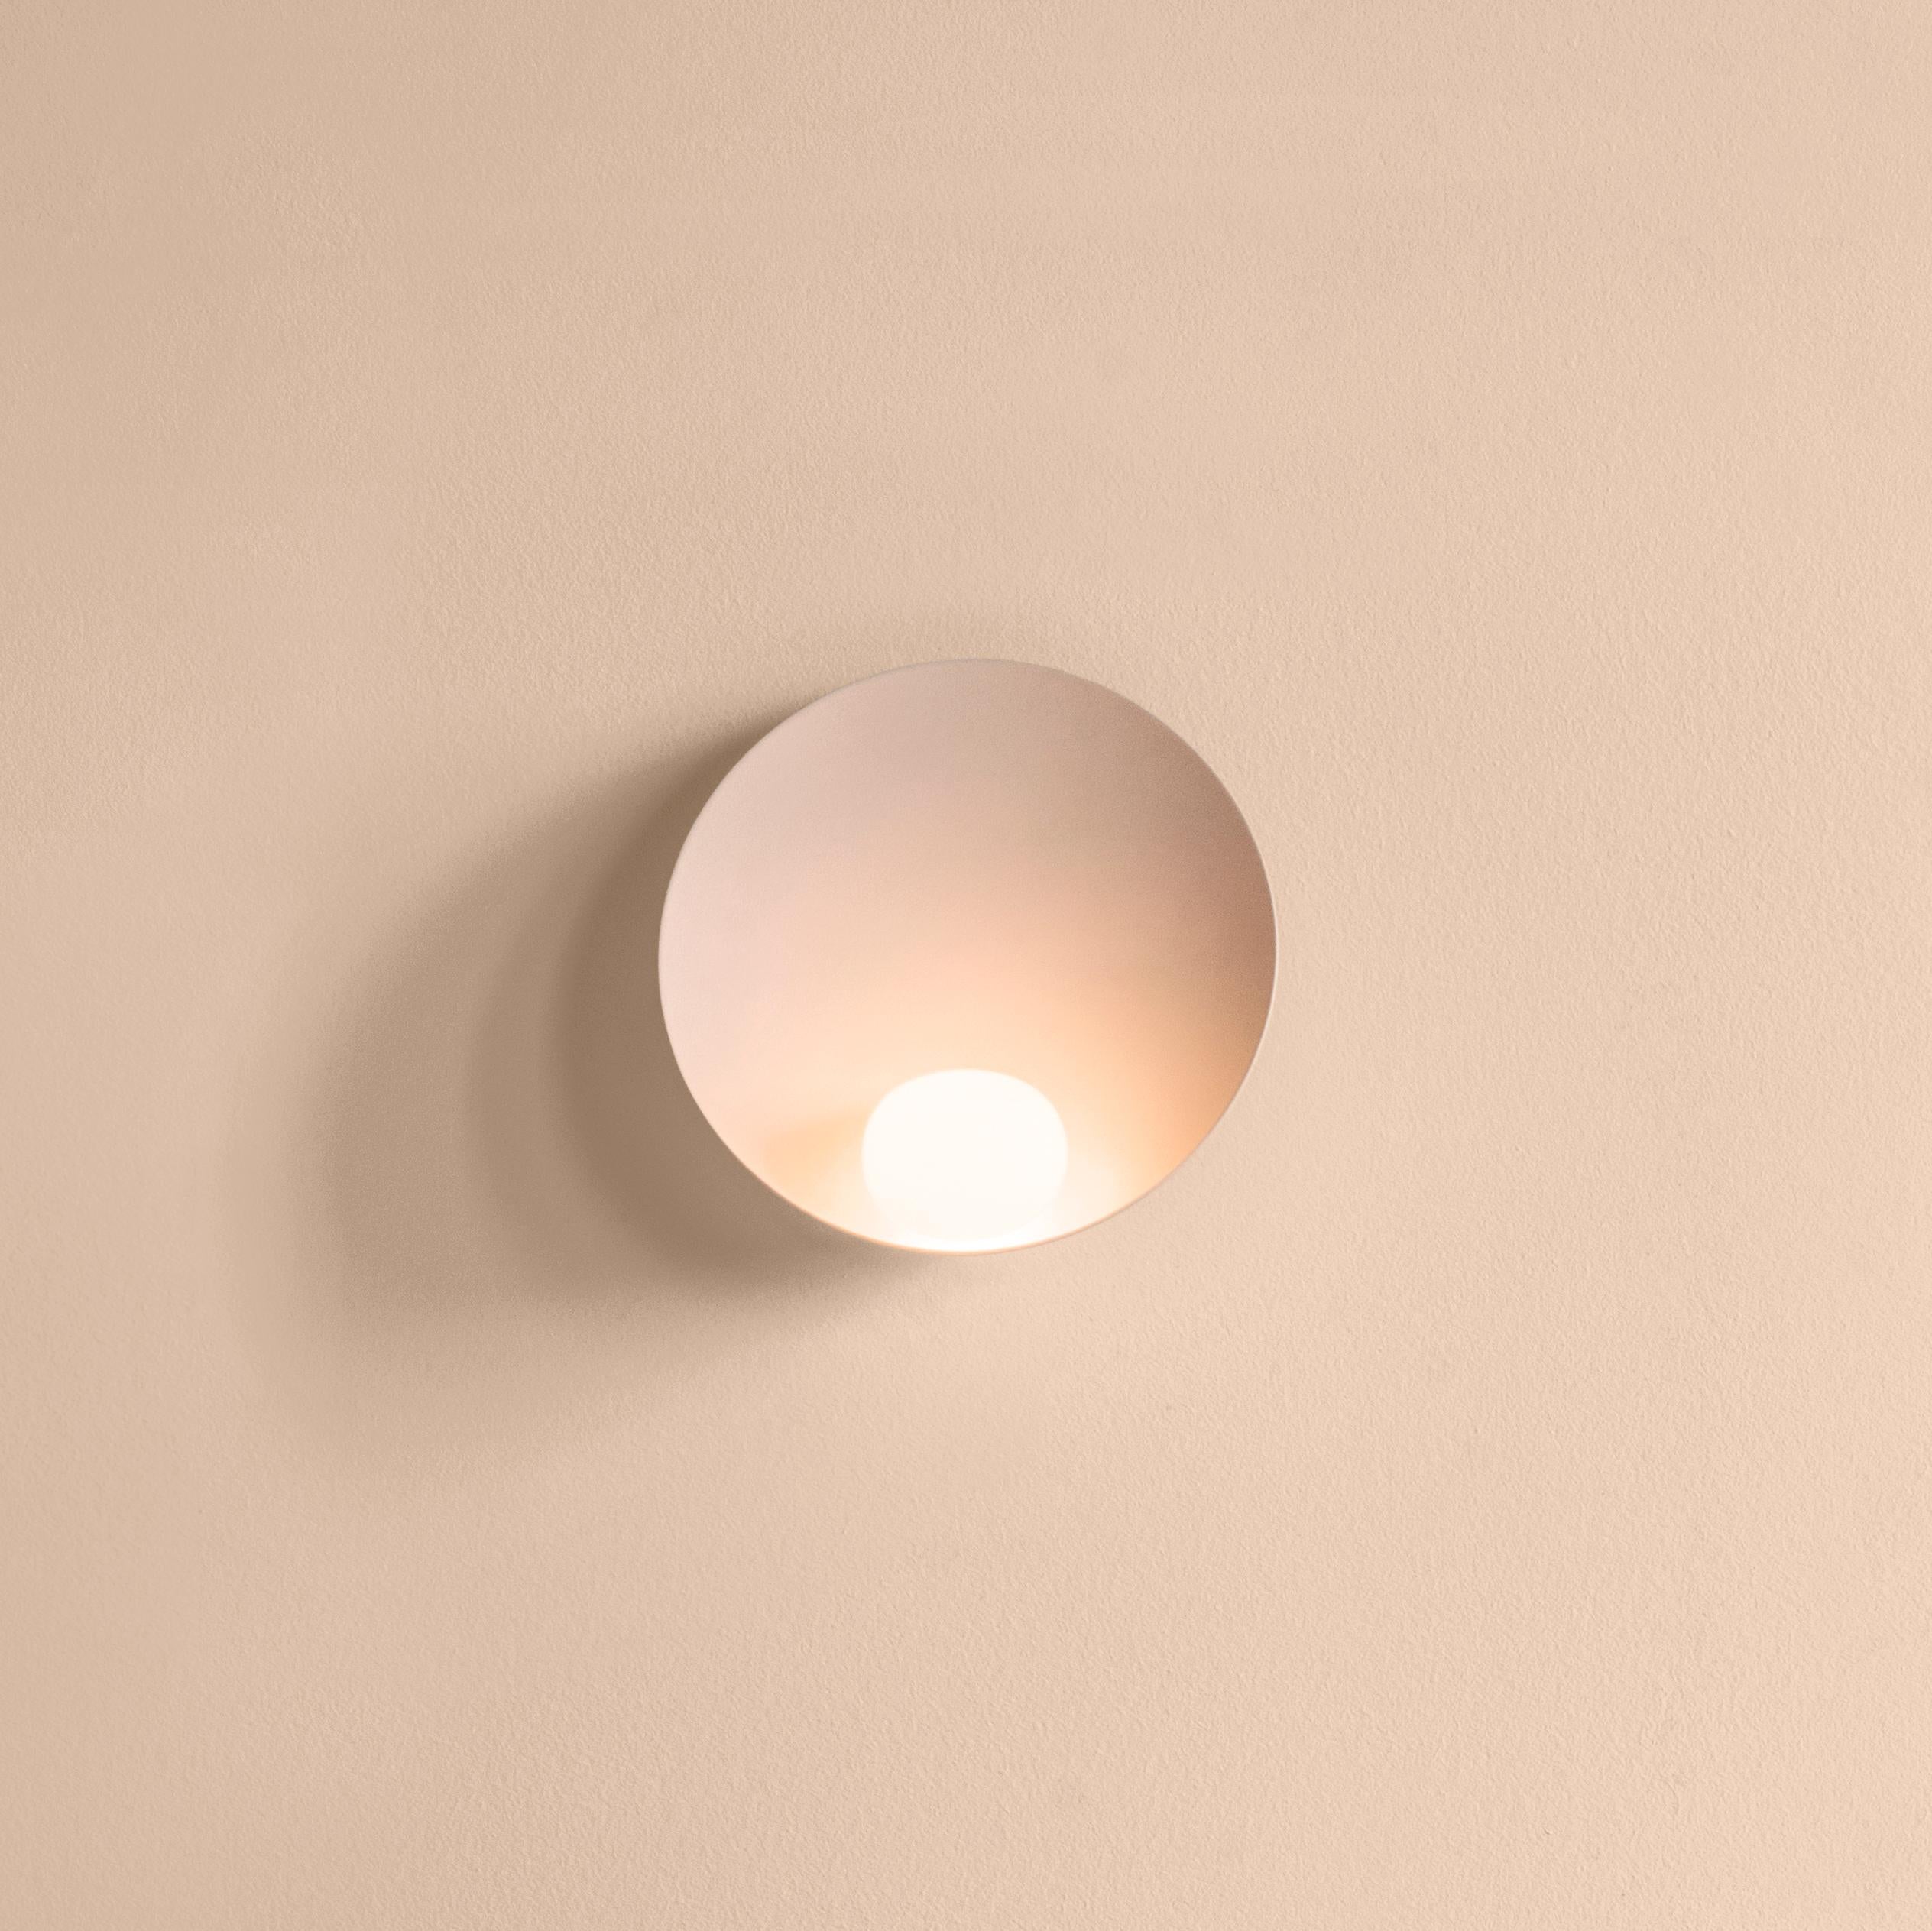 Musa, made from an aluminum base with a triple blown-glass opal diffuser, combines delicacy and subtlety. The base captures light as the small glass sphere transforms it into a soft illumination. The wall lamp remains cool to the touch thanks to an